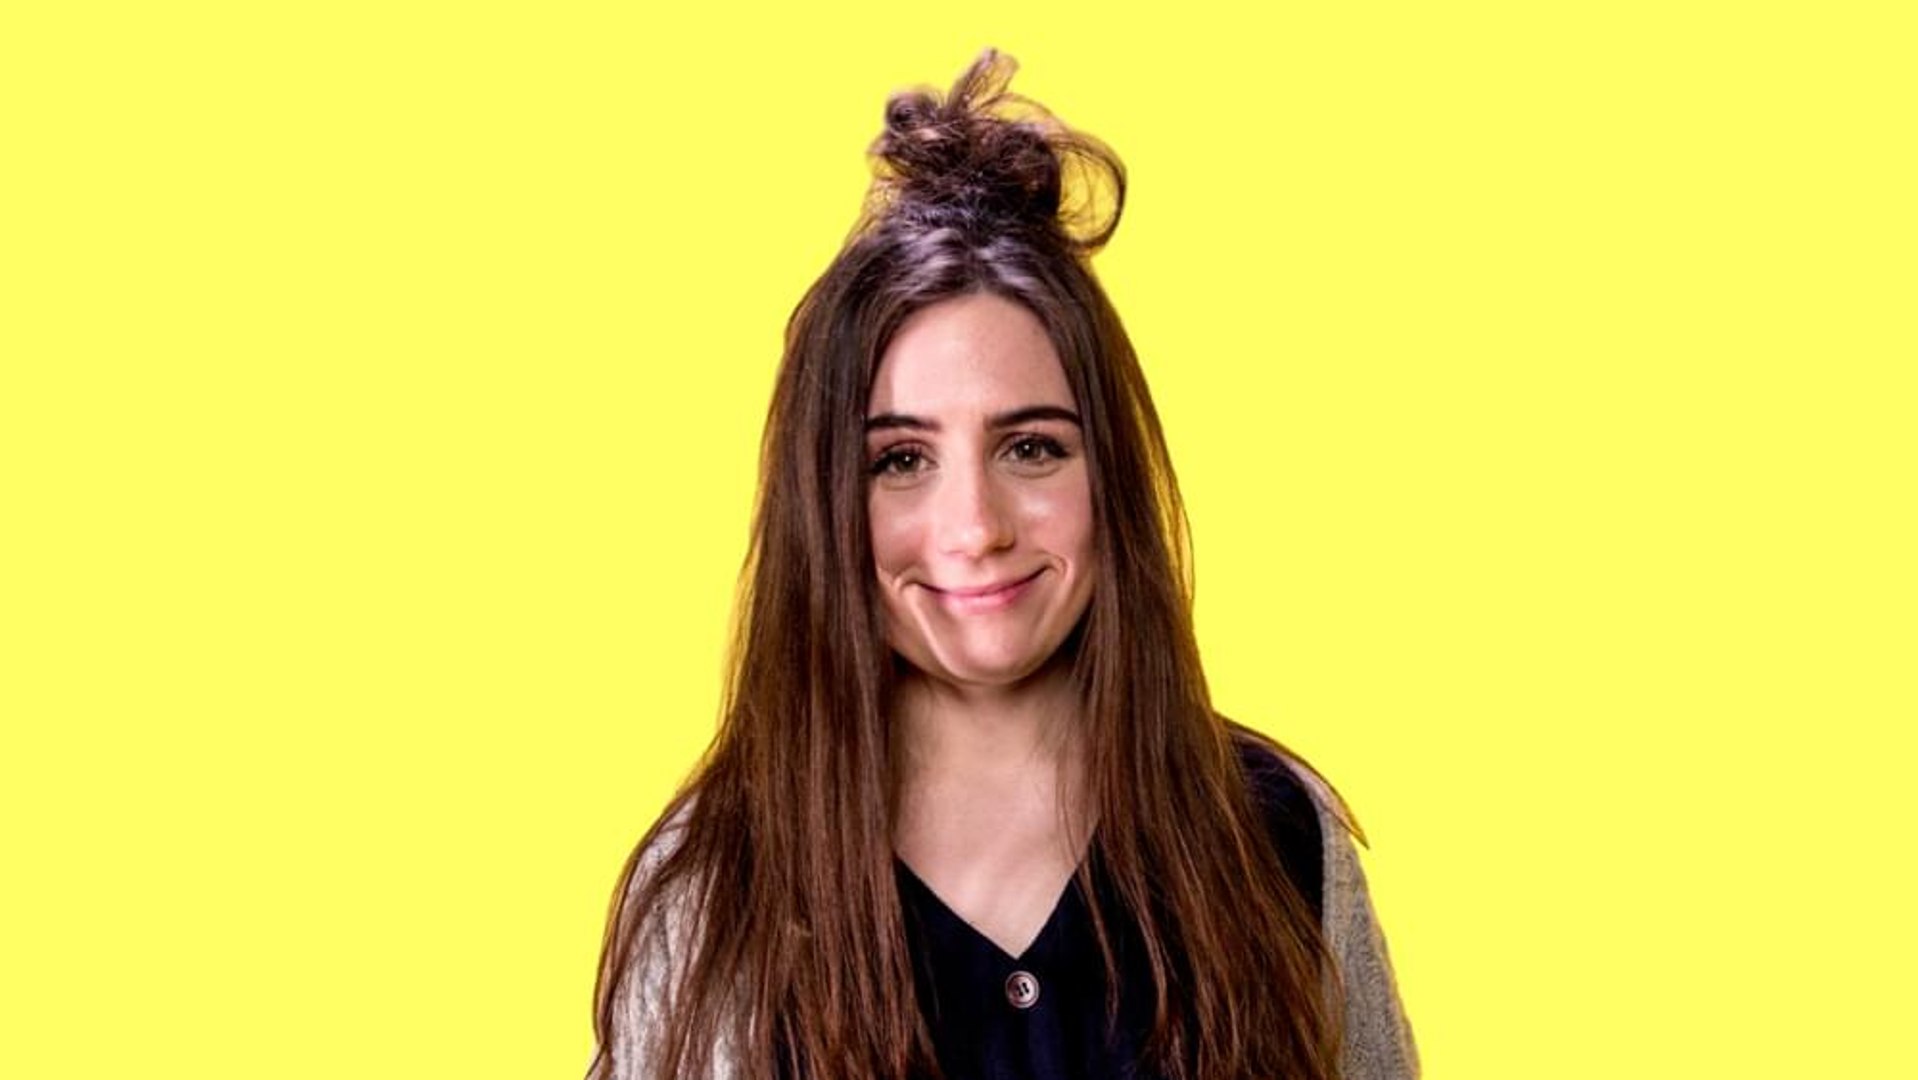 VIDEO: r Dodie Opens Up About Mental Health, Hid Lyrics to New Song  In Videos